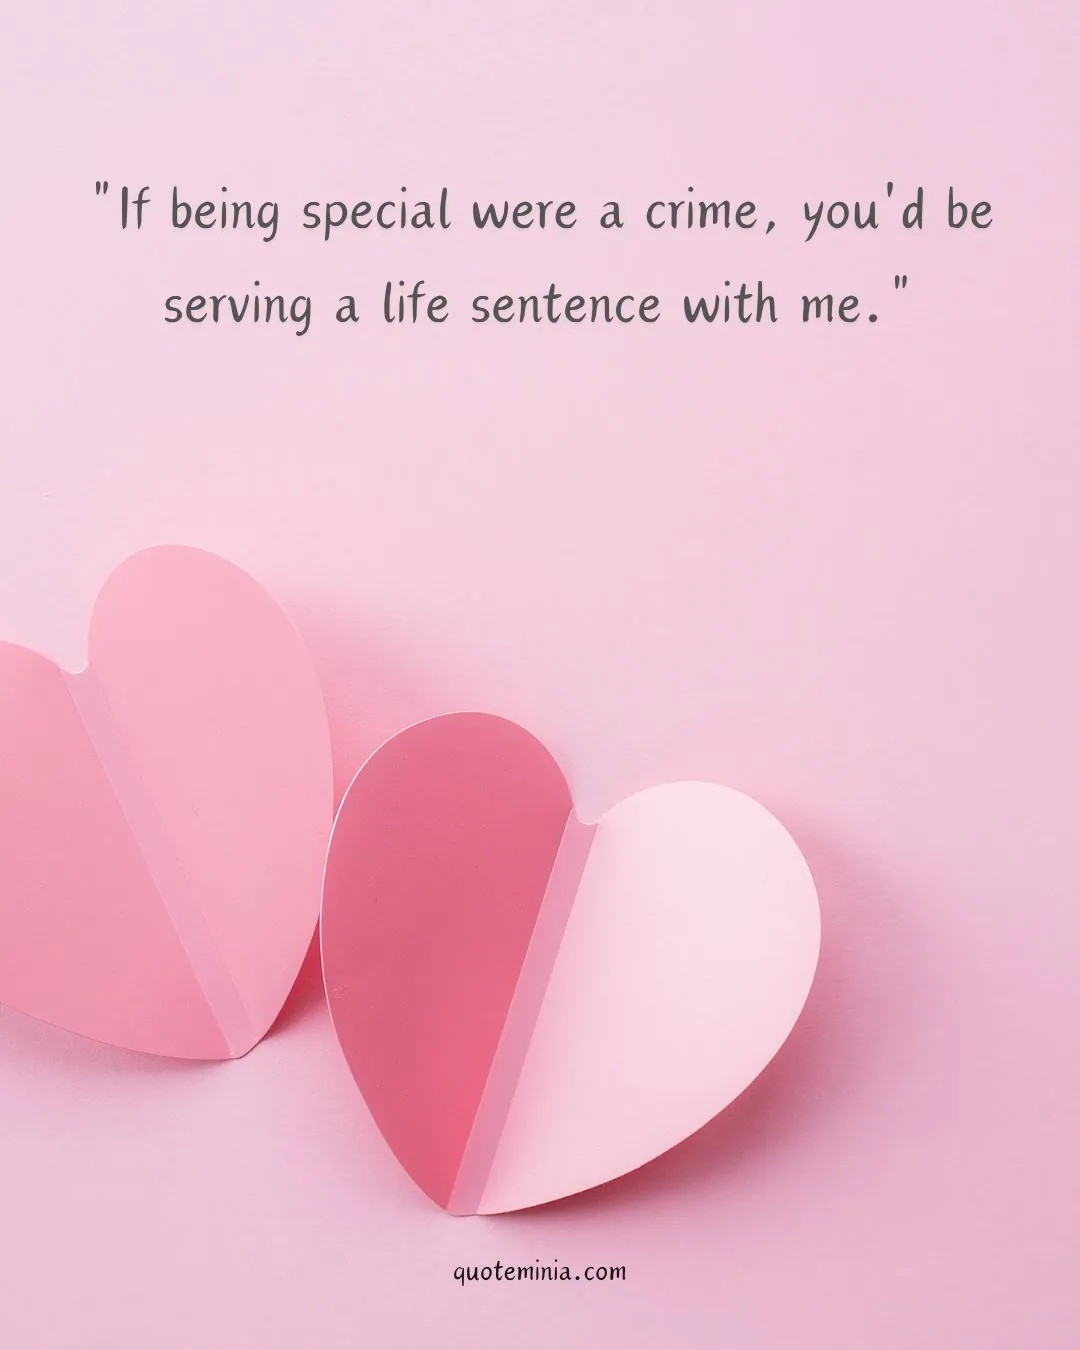 You Are So Special to Me Quotes Image